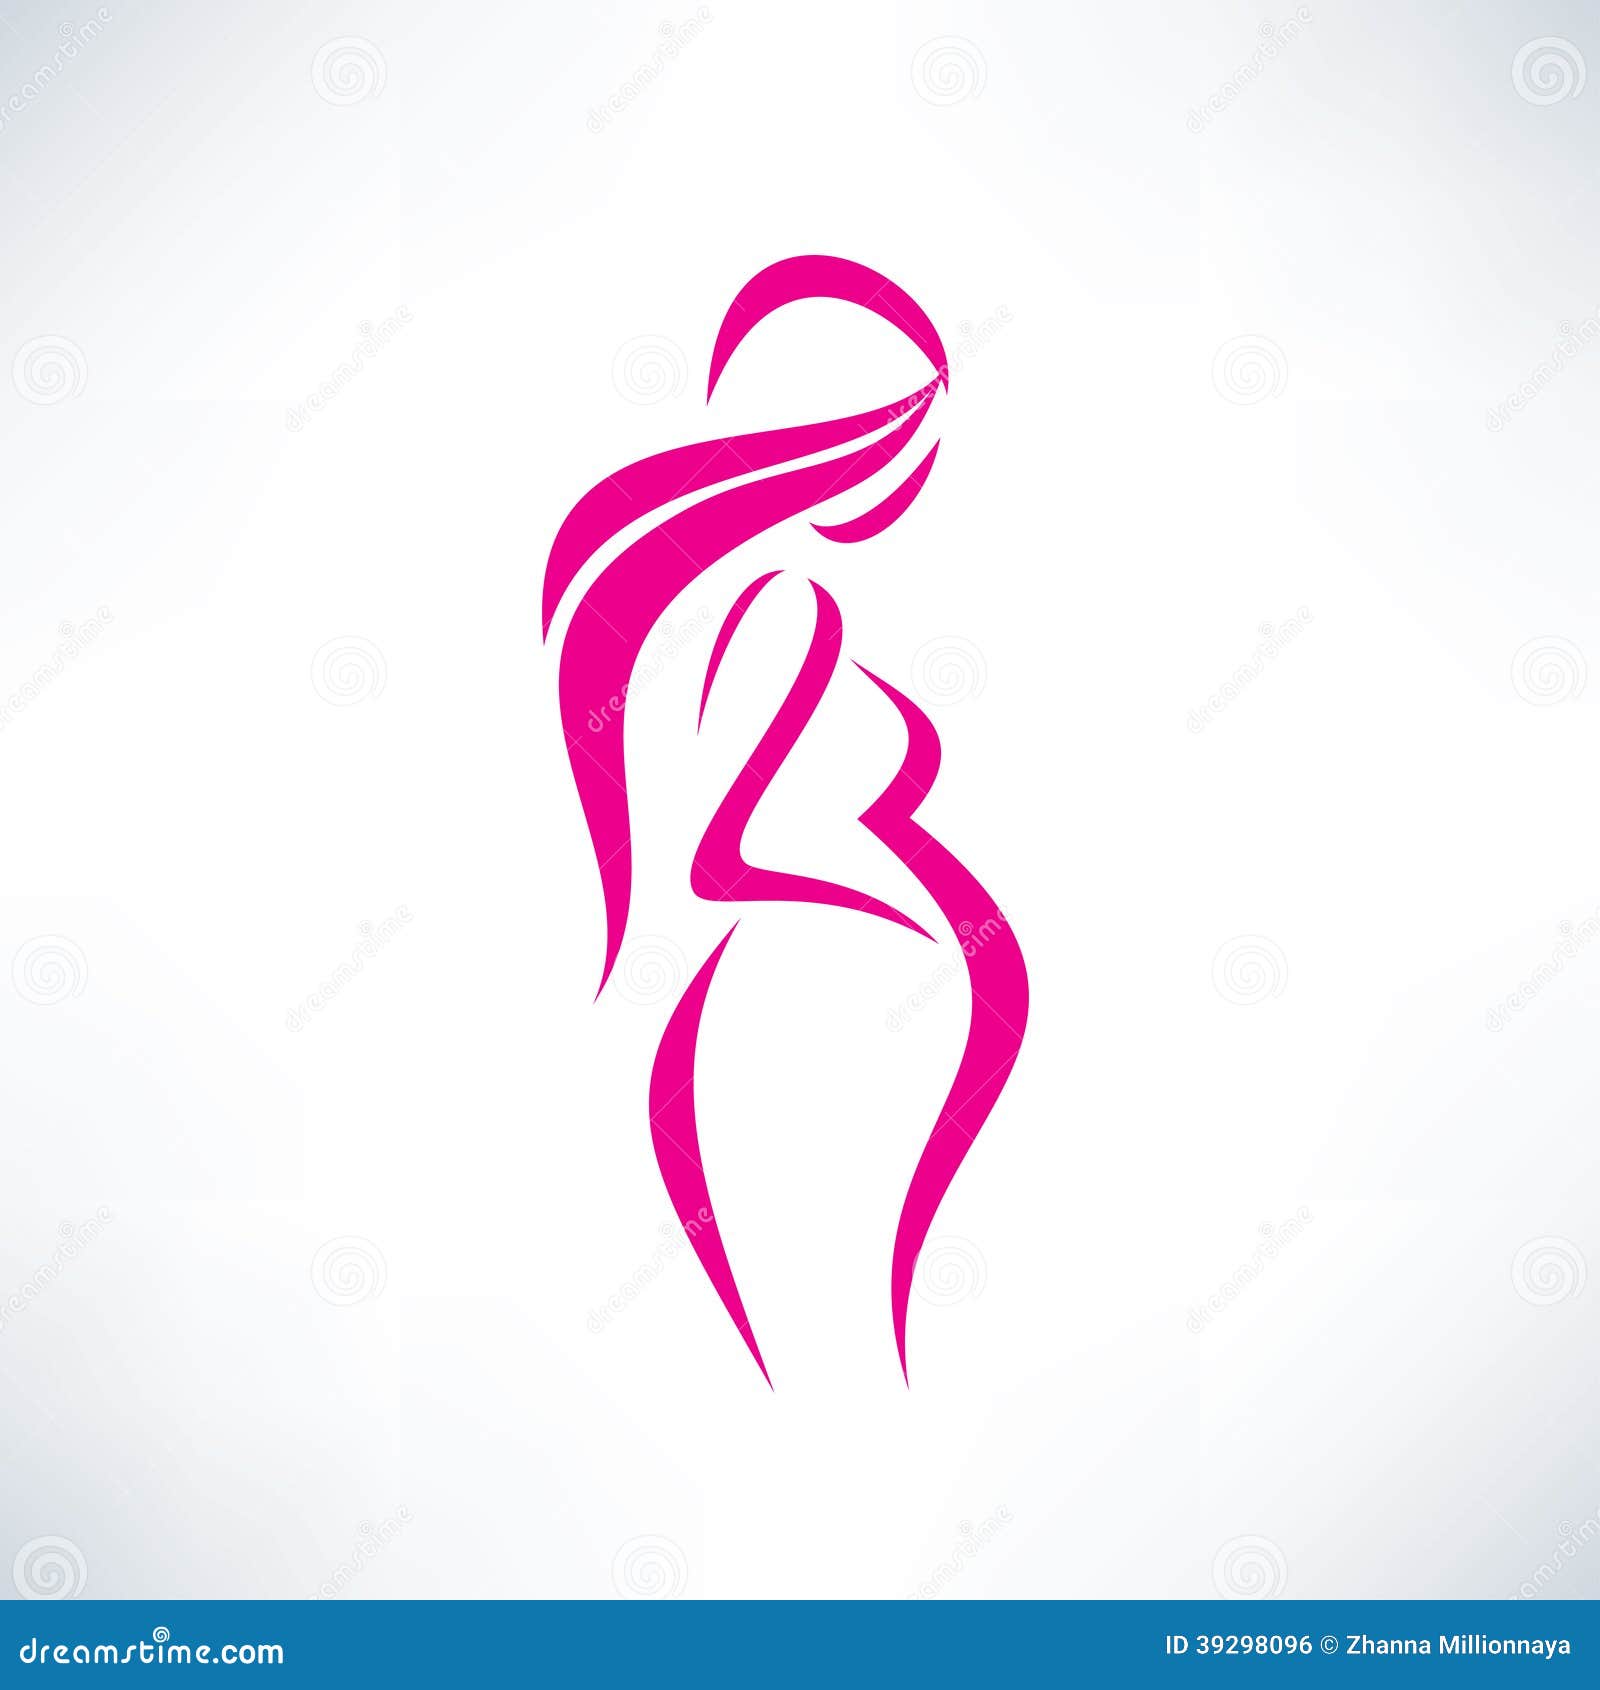 free clipart images pregnant woman - photo #29